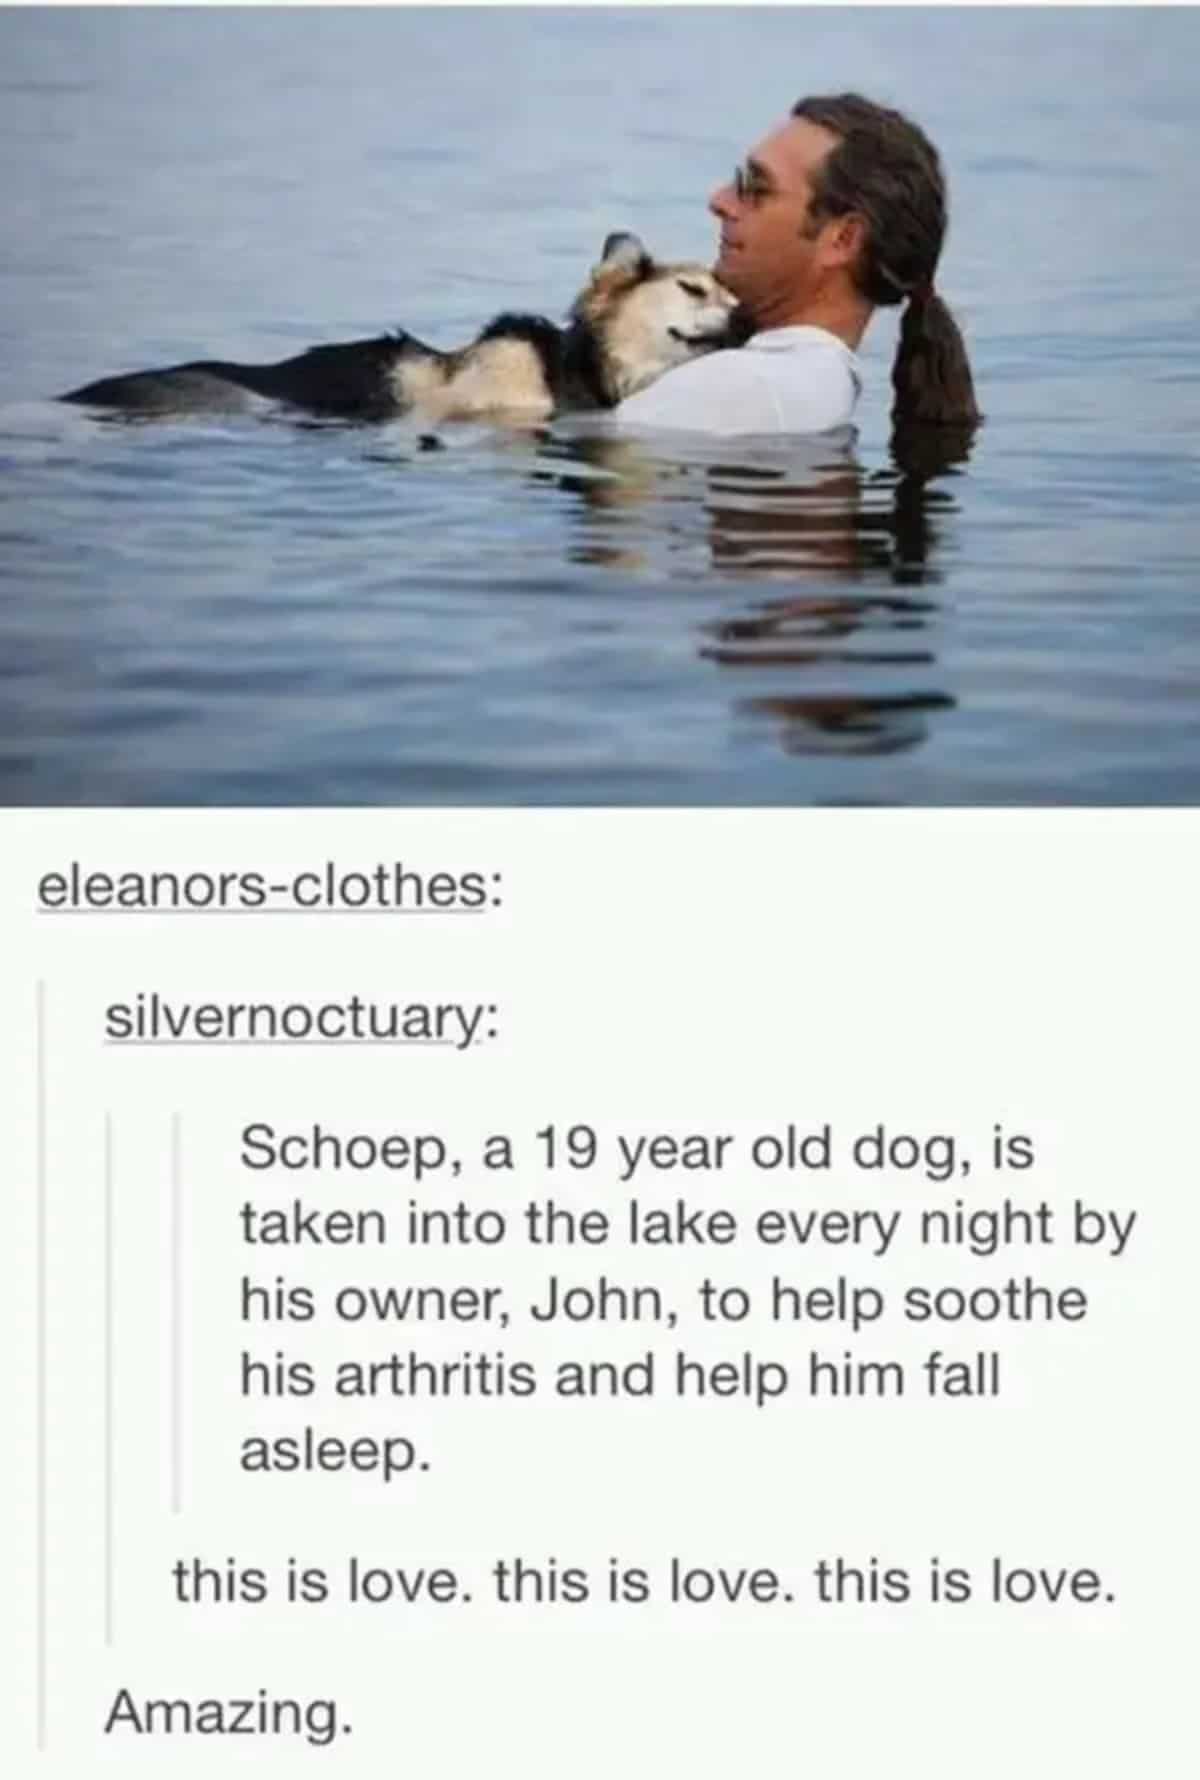 man floating in lake holding black and brown dog with caption saying the 19 year old dog is taken to lake to soothe arthritis